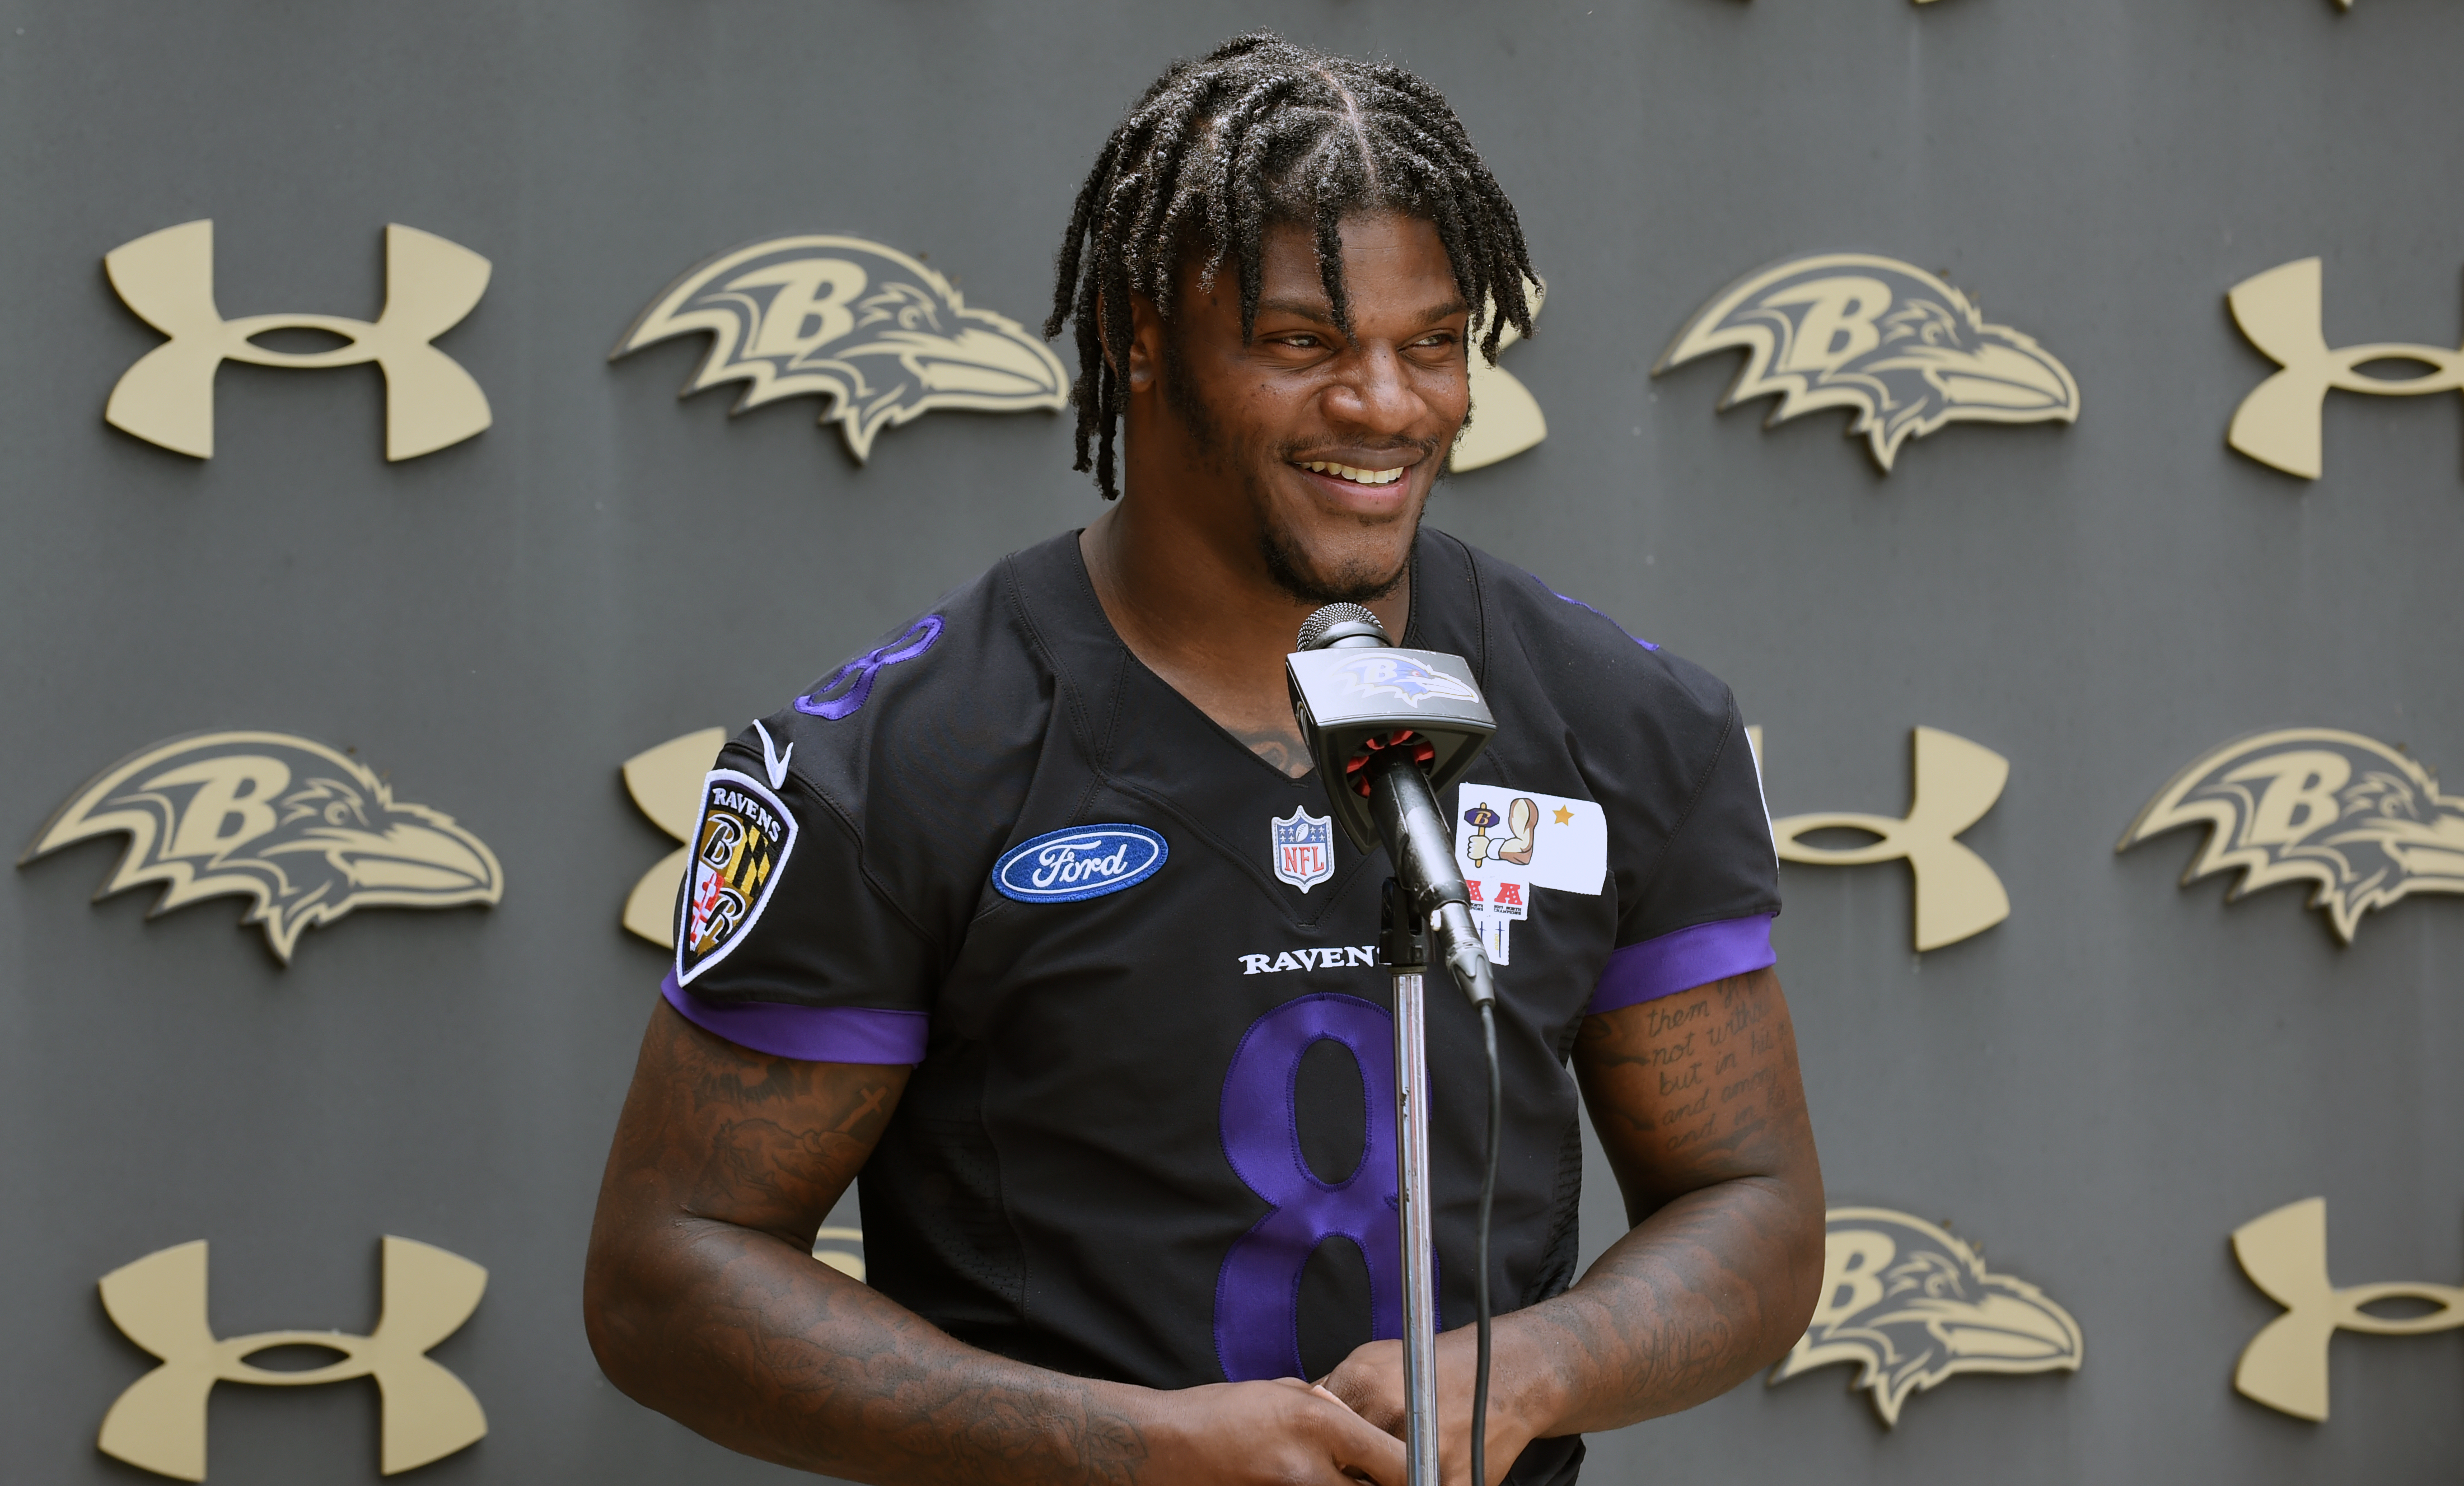 Lamar Jackson contract: Ravens QB is NFL's new highest-paid player